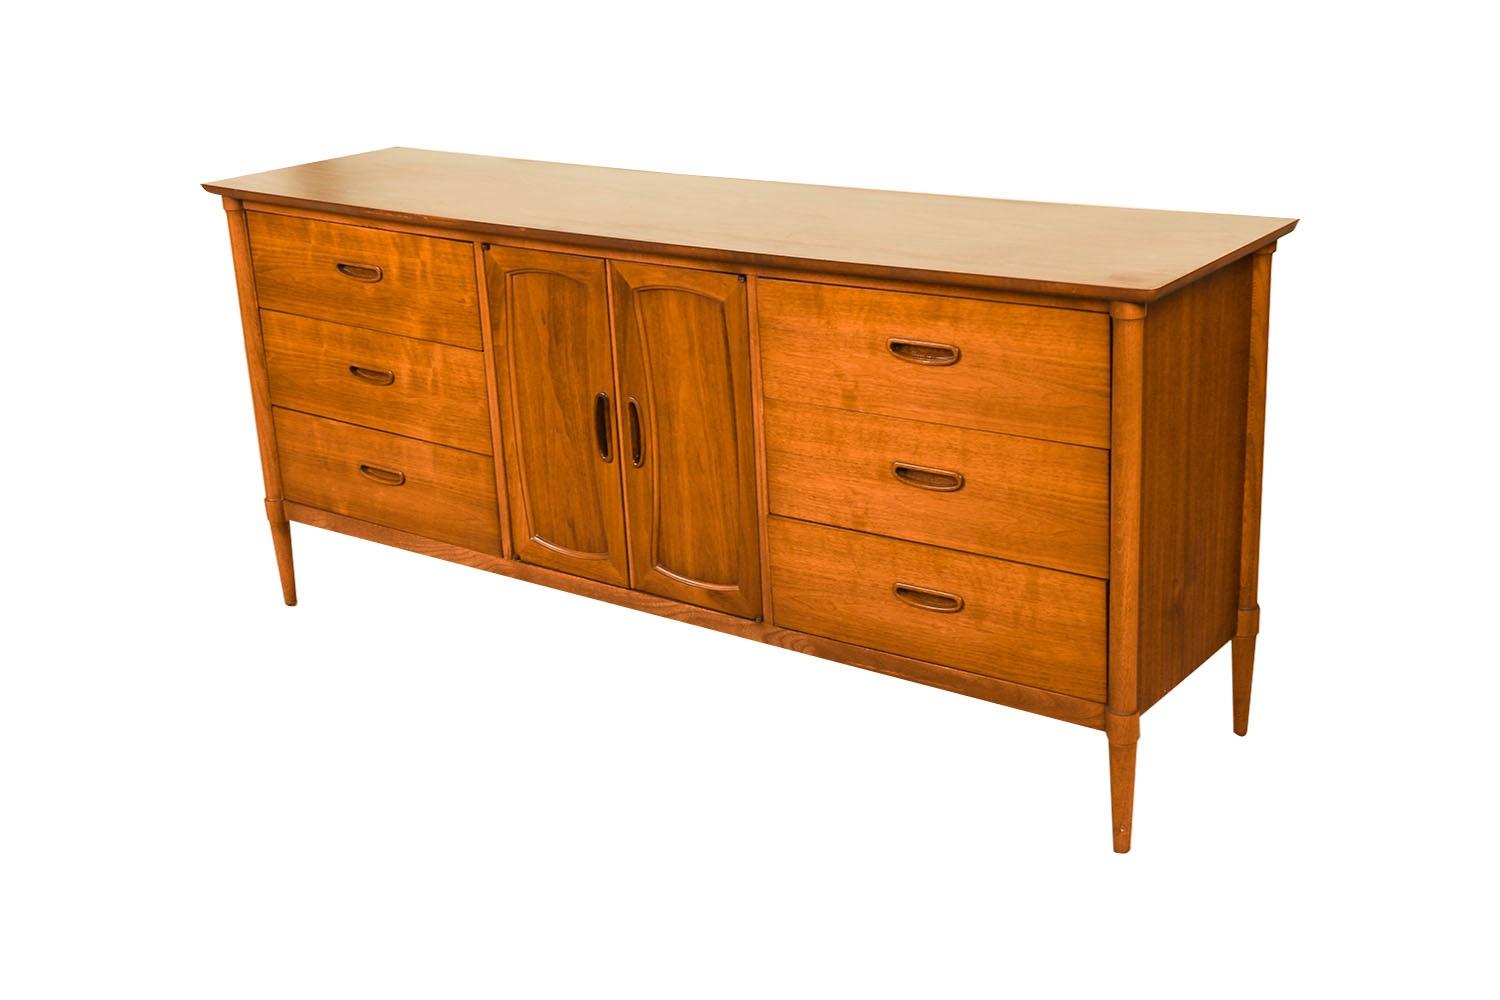 A classic Mid Century Modern walnut dresser or sideboard by Lane Furniture Company. This vintage walnut dresser features a beautiful laminate top, six dovetailed drawers, adorned with beautiful sculpture pulls, flanking two centered doors that open